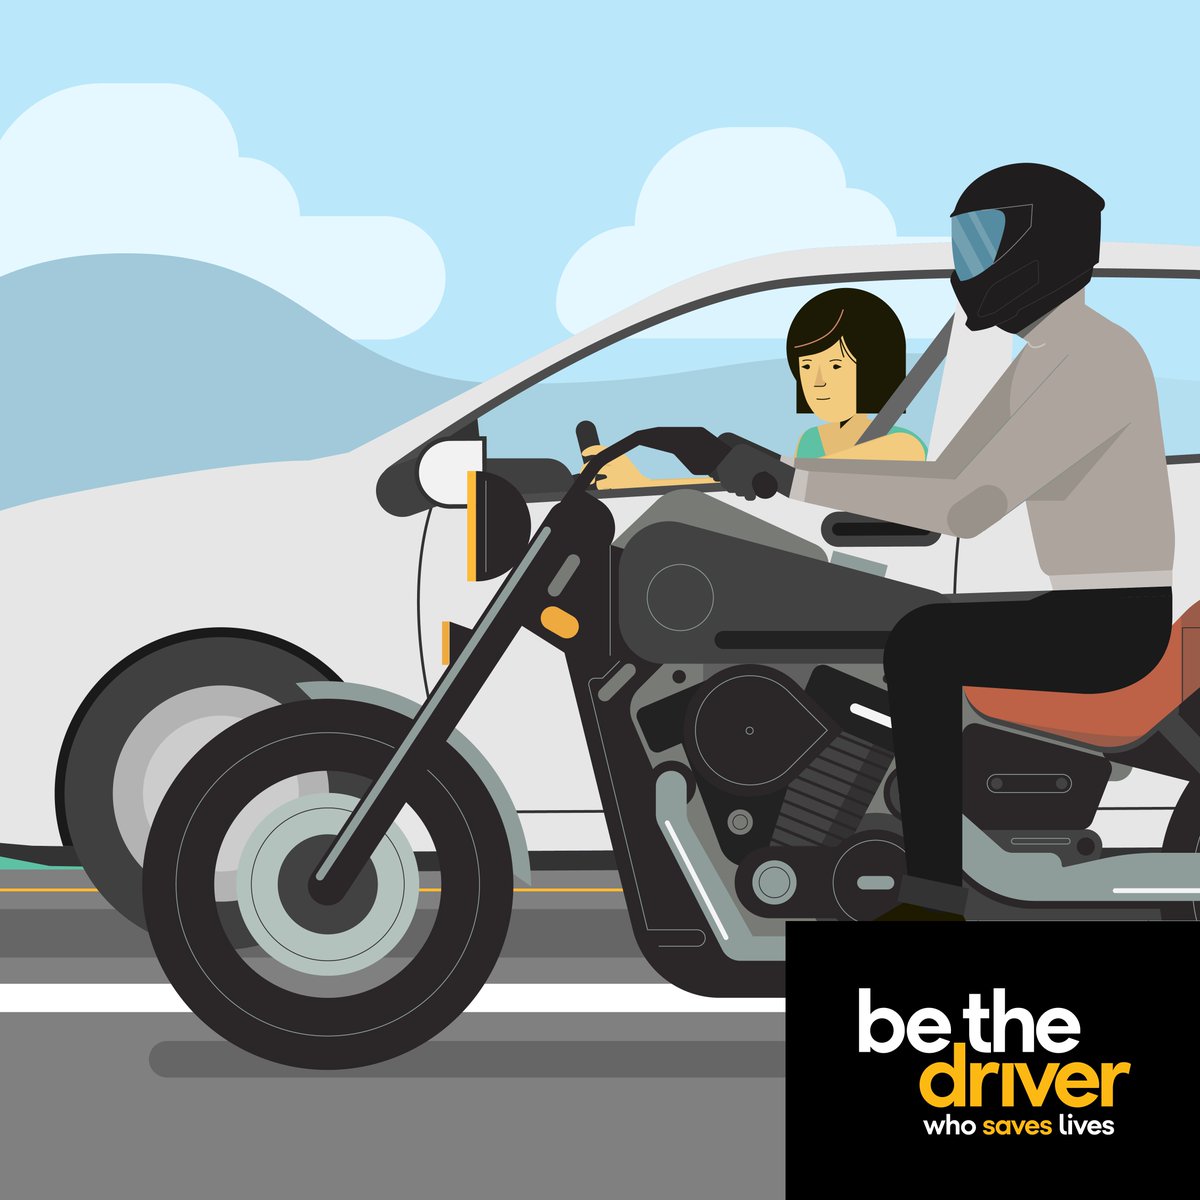 ATTENTION BIKERS: Riding defensively is an important part of a smart ride. Be on the lookout for other drivers and riders. #BeTheDriver #MotorcyleSafety